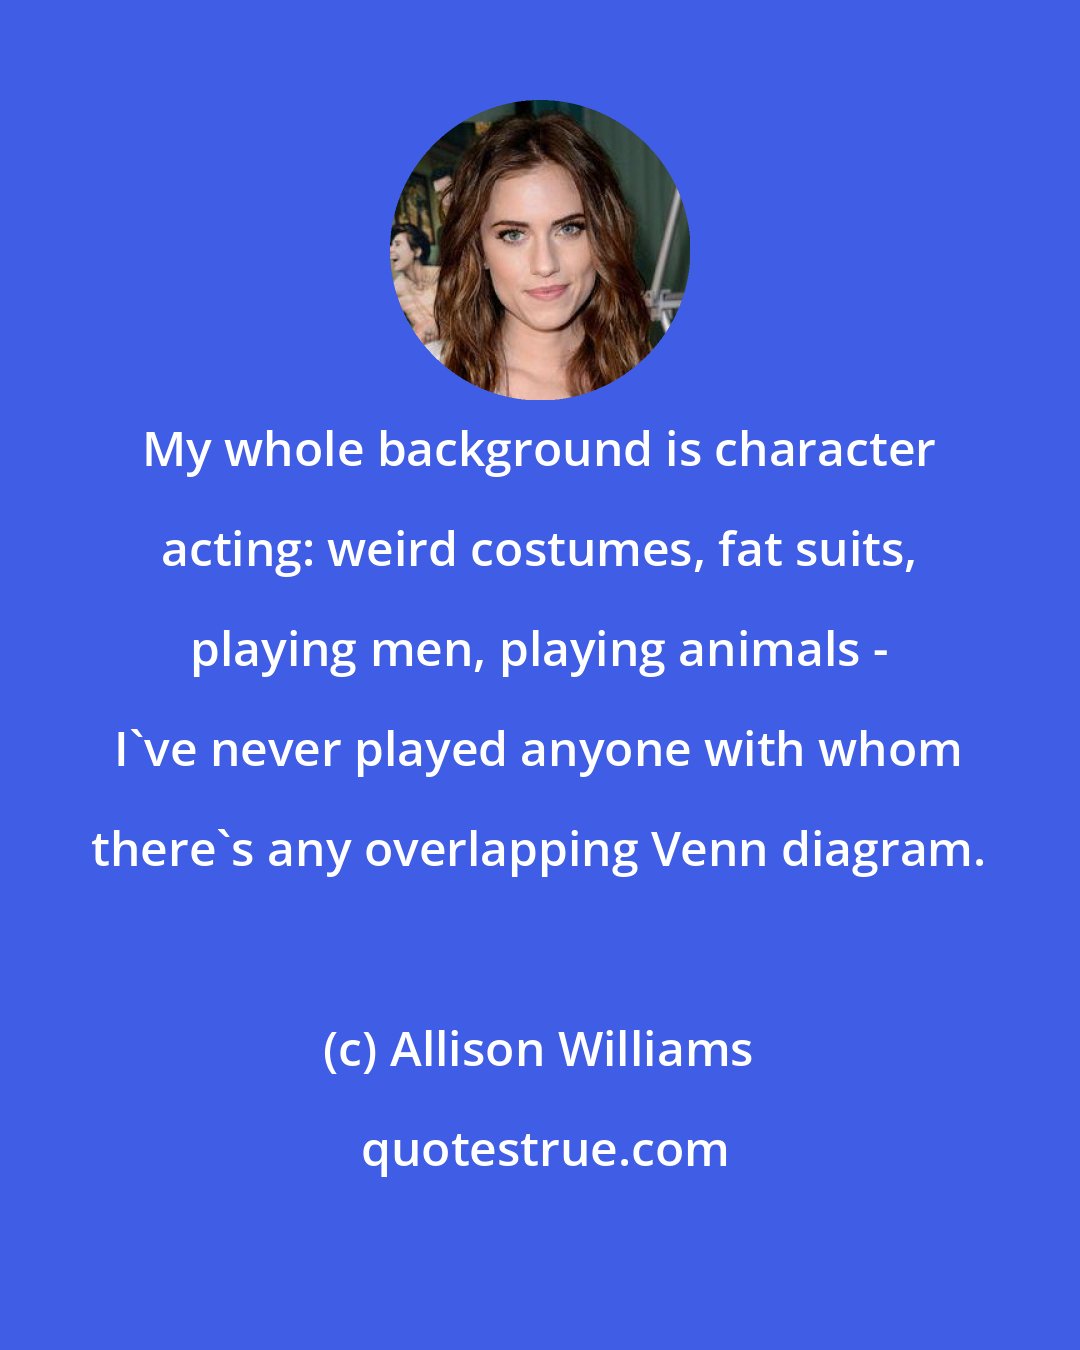 Allison Williams: My whole background is character acting: weird costumes, fat suits, playing men, playing animals - I've never played anyone with whom there's any overlapping Venn diagram.